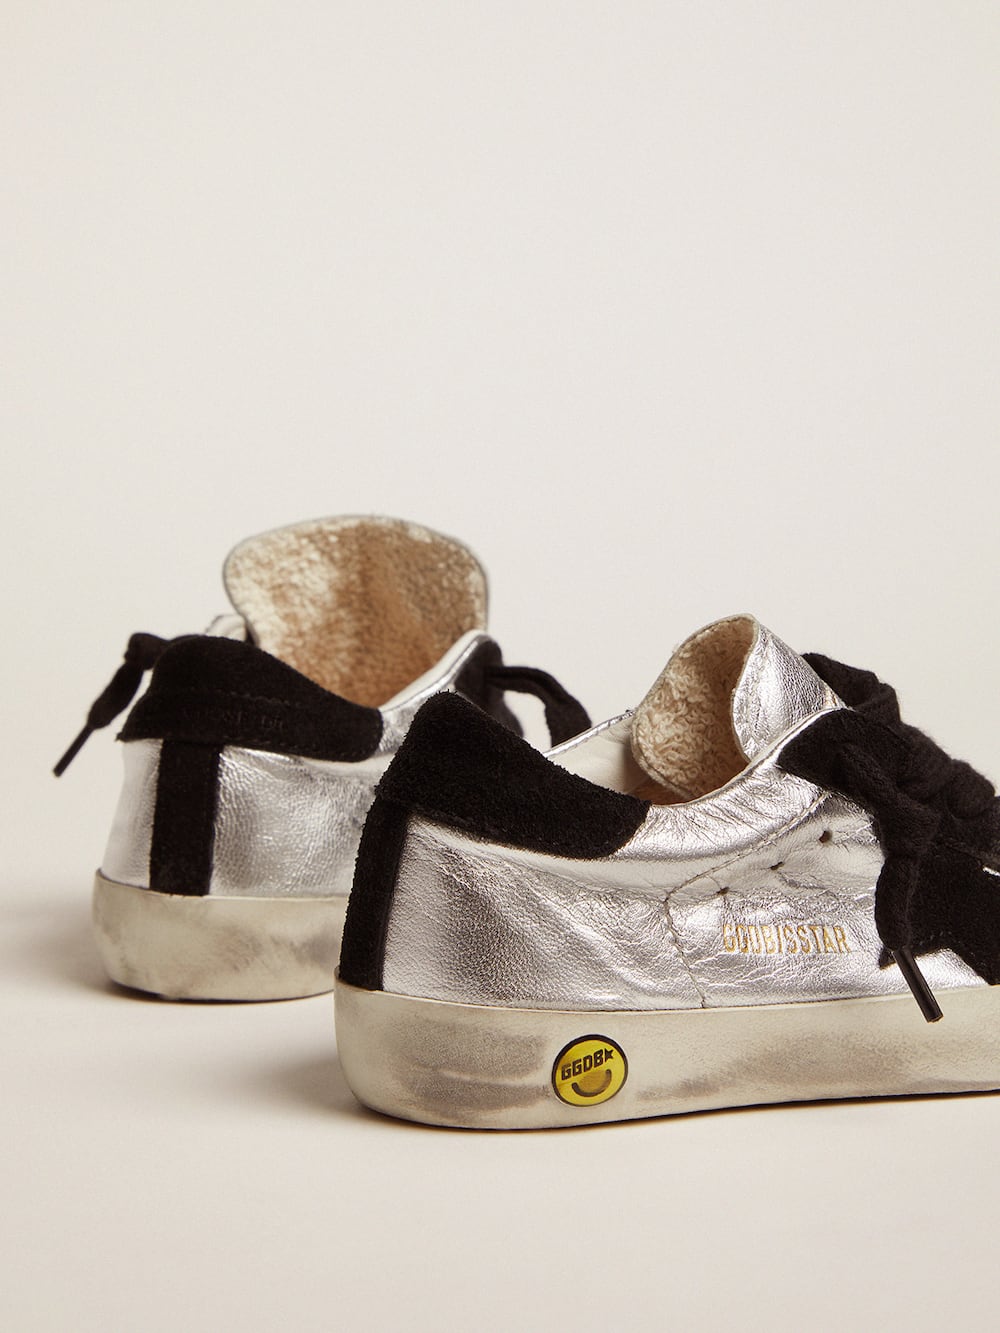 Golden Goose - Super-Star sneakers in silver leather with suede inserts in 